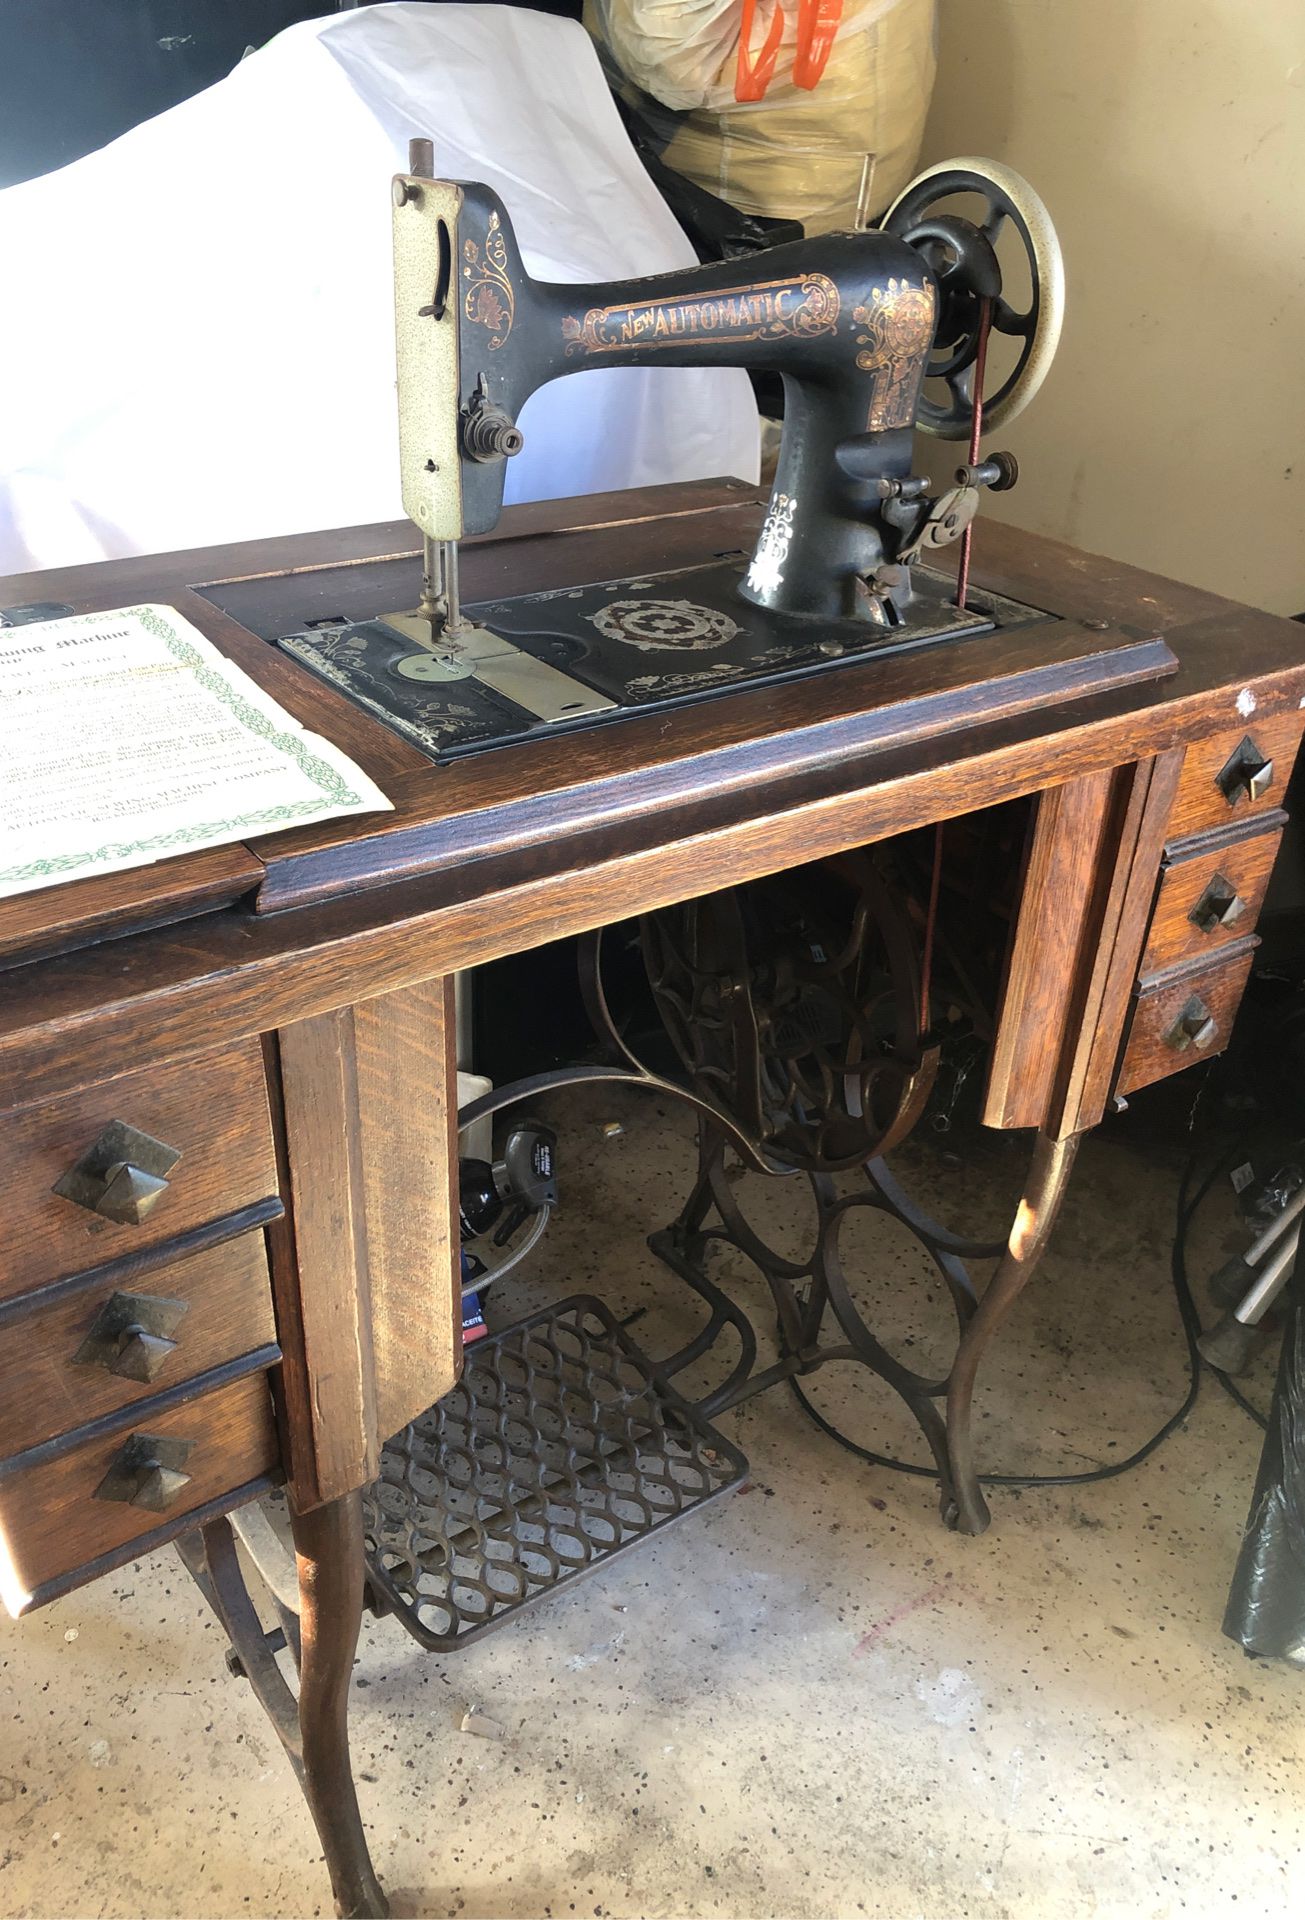 1915 antique automatic sewing machine